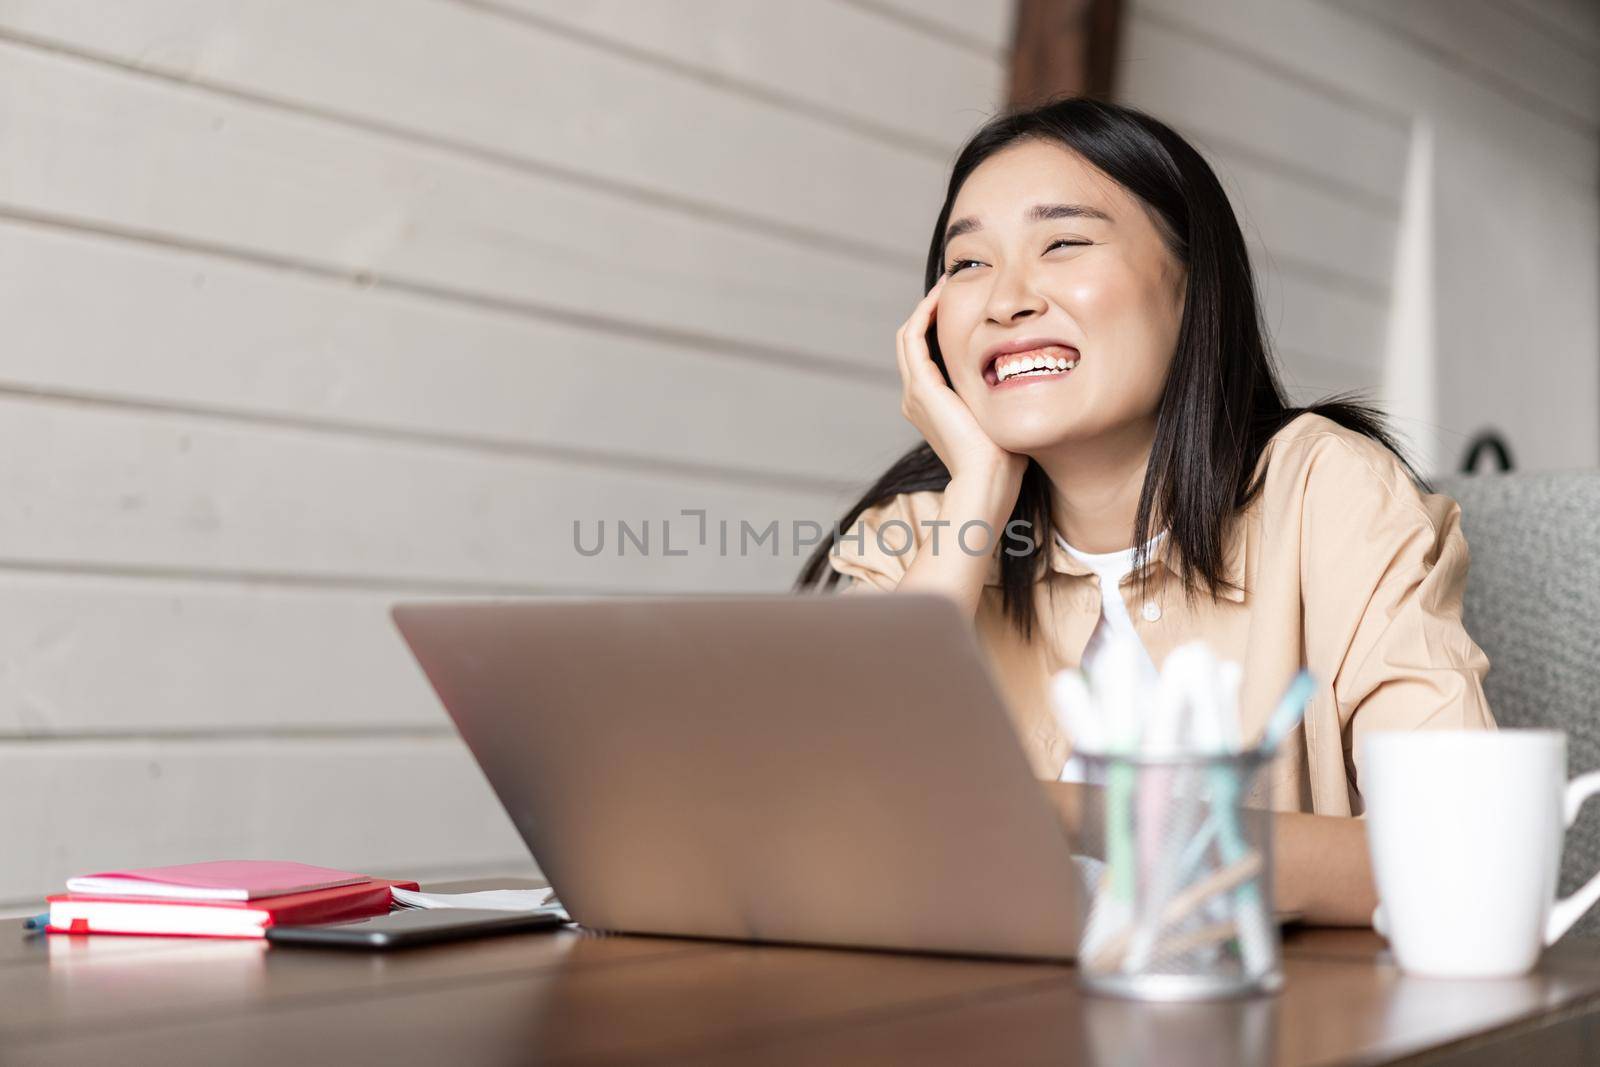 Asian girl student working on laptop, laughing and smiling, talking to someone, studying together from home, doing homework.